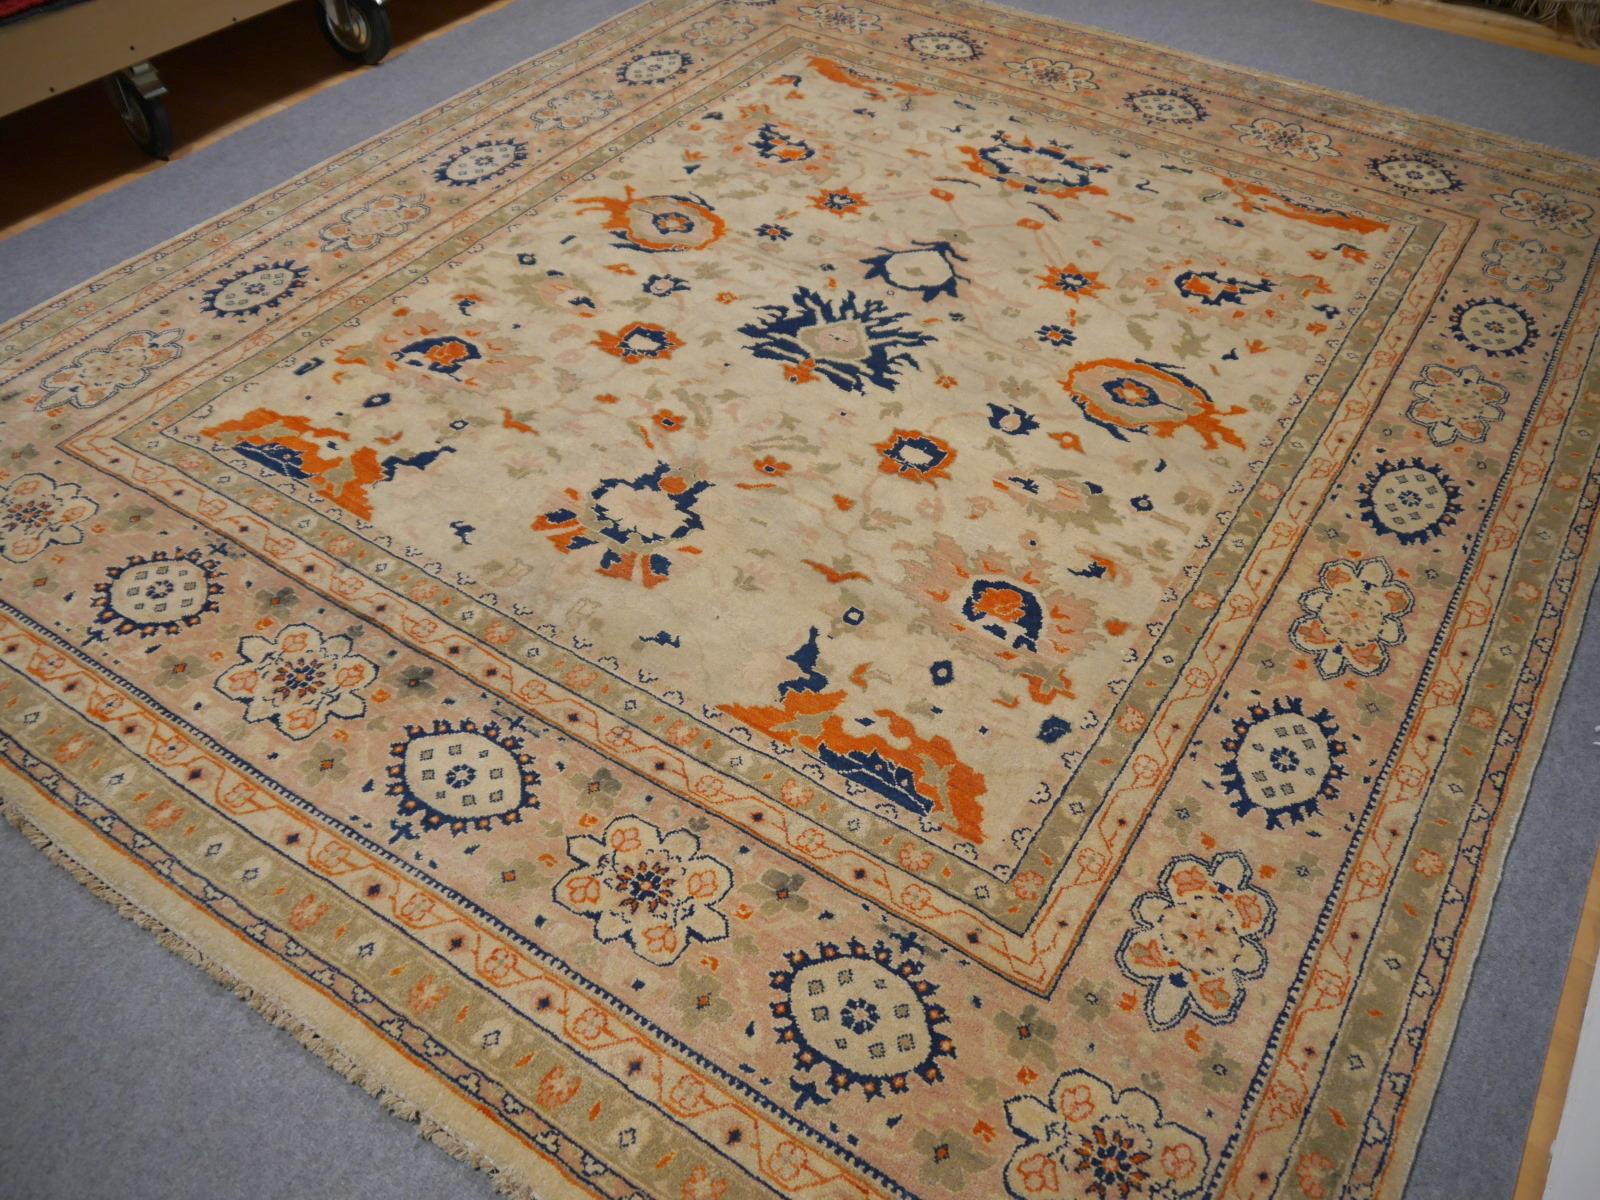 A beautiful circ 8 x 10 ft contemporary design carpet, hand knotted using finest wool. On a light crème field, the design of Lotus blossoms standing next to each other executed in orange, blue and green tones.
Design influences are from Persian